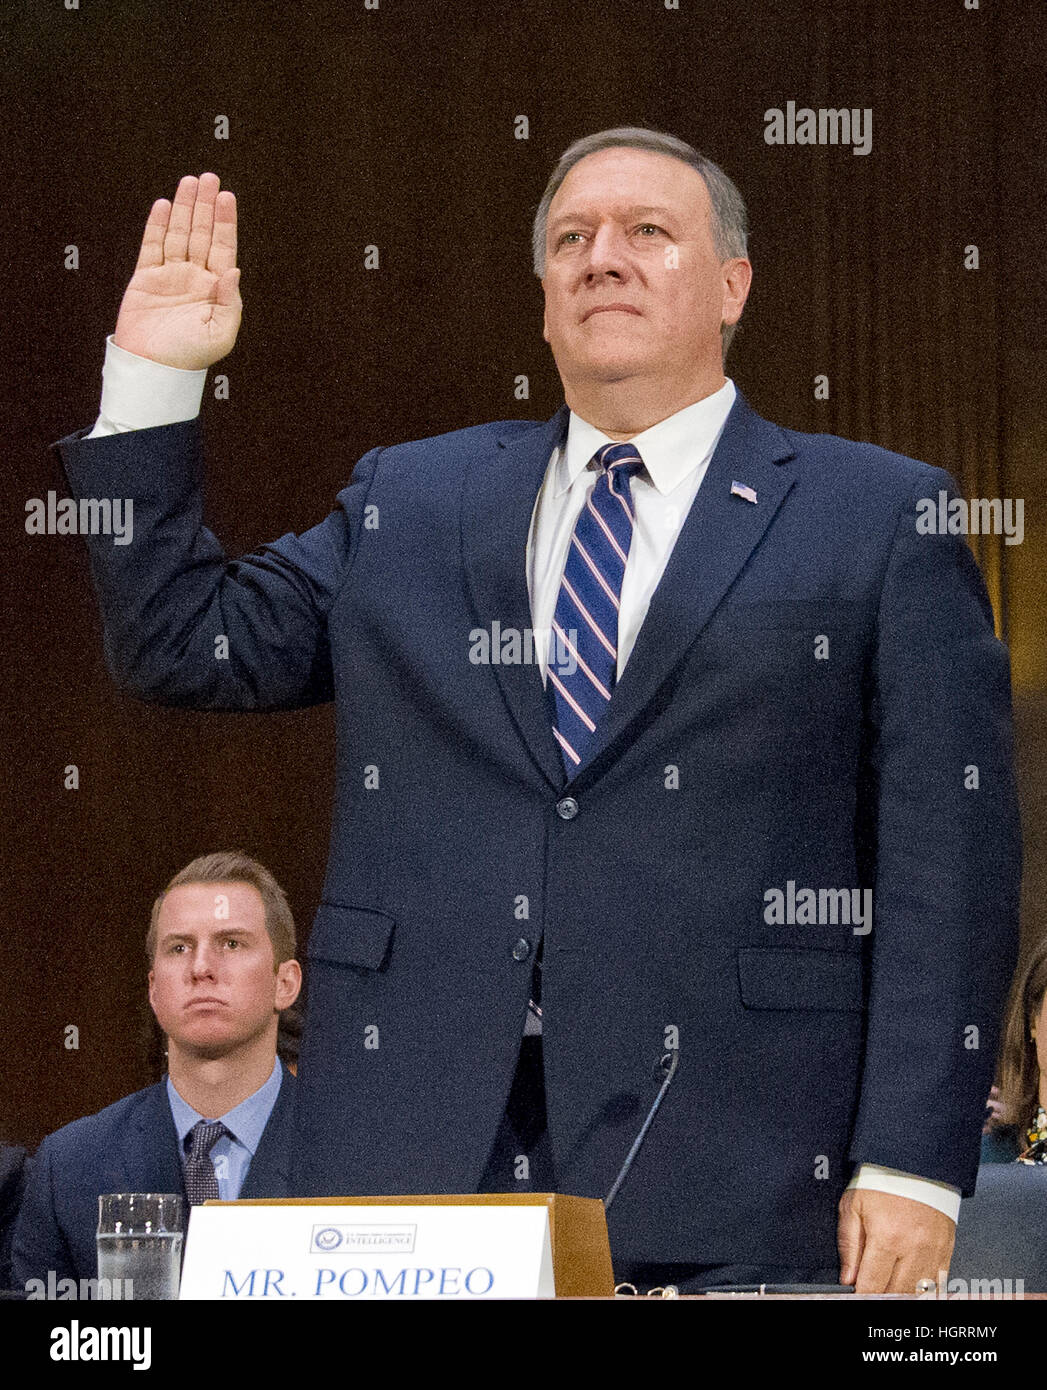 Washington DC, USA. 12th January 2017. United States Representative Mike Pompeo (Republican of Kansas) is sworn-in to testify before the US Senate Select Committee on Intelligence during a confirmation hearing on his nomination to be Director of the Central Intelligence Agency (CIA) on Capitol Hill in Washington, DC on Thursday, January 12, 2017. Credit: MediaPunch Inc/Alamy Live News Stock Photo